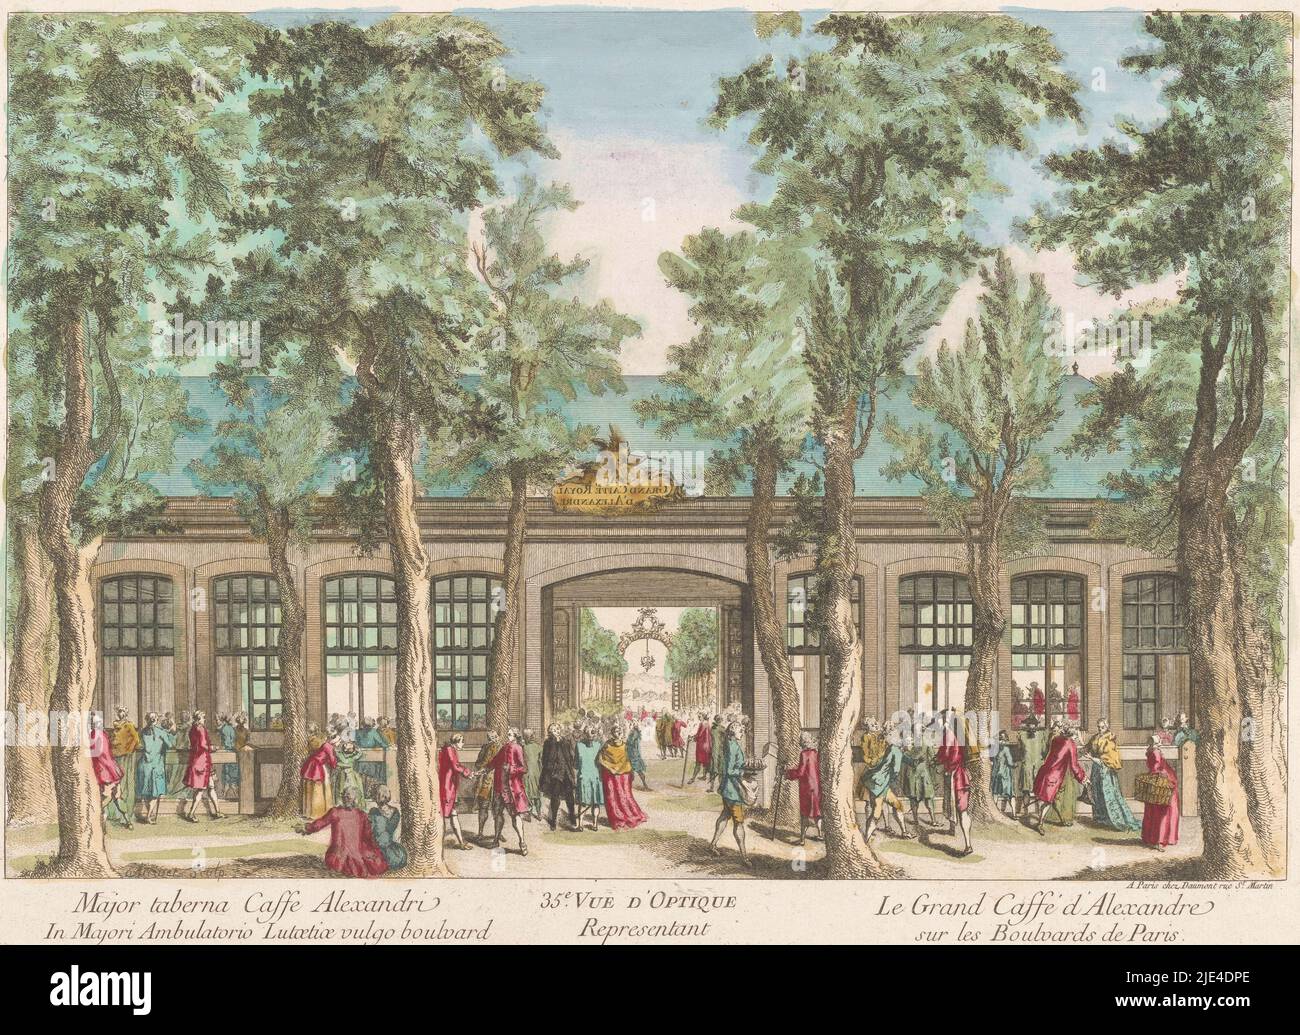 View of the Grand Caffé Royal d'Alexandre on the Boulevard du Temple in Paris, Jean-François Daumont, 1745 - 1775, Numbered in the title: 35., publisher: Jean-François Daumont, (mentioned on object), print maker: anonymous, publisher: Paris, print maker: France, 1745 - 1775, paper, etching, brush, h 306 mm × w 416 mm Stock Photo